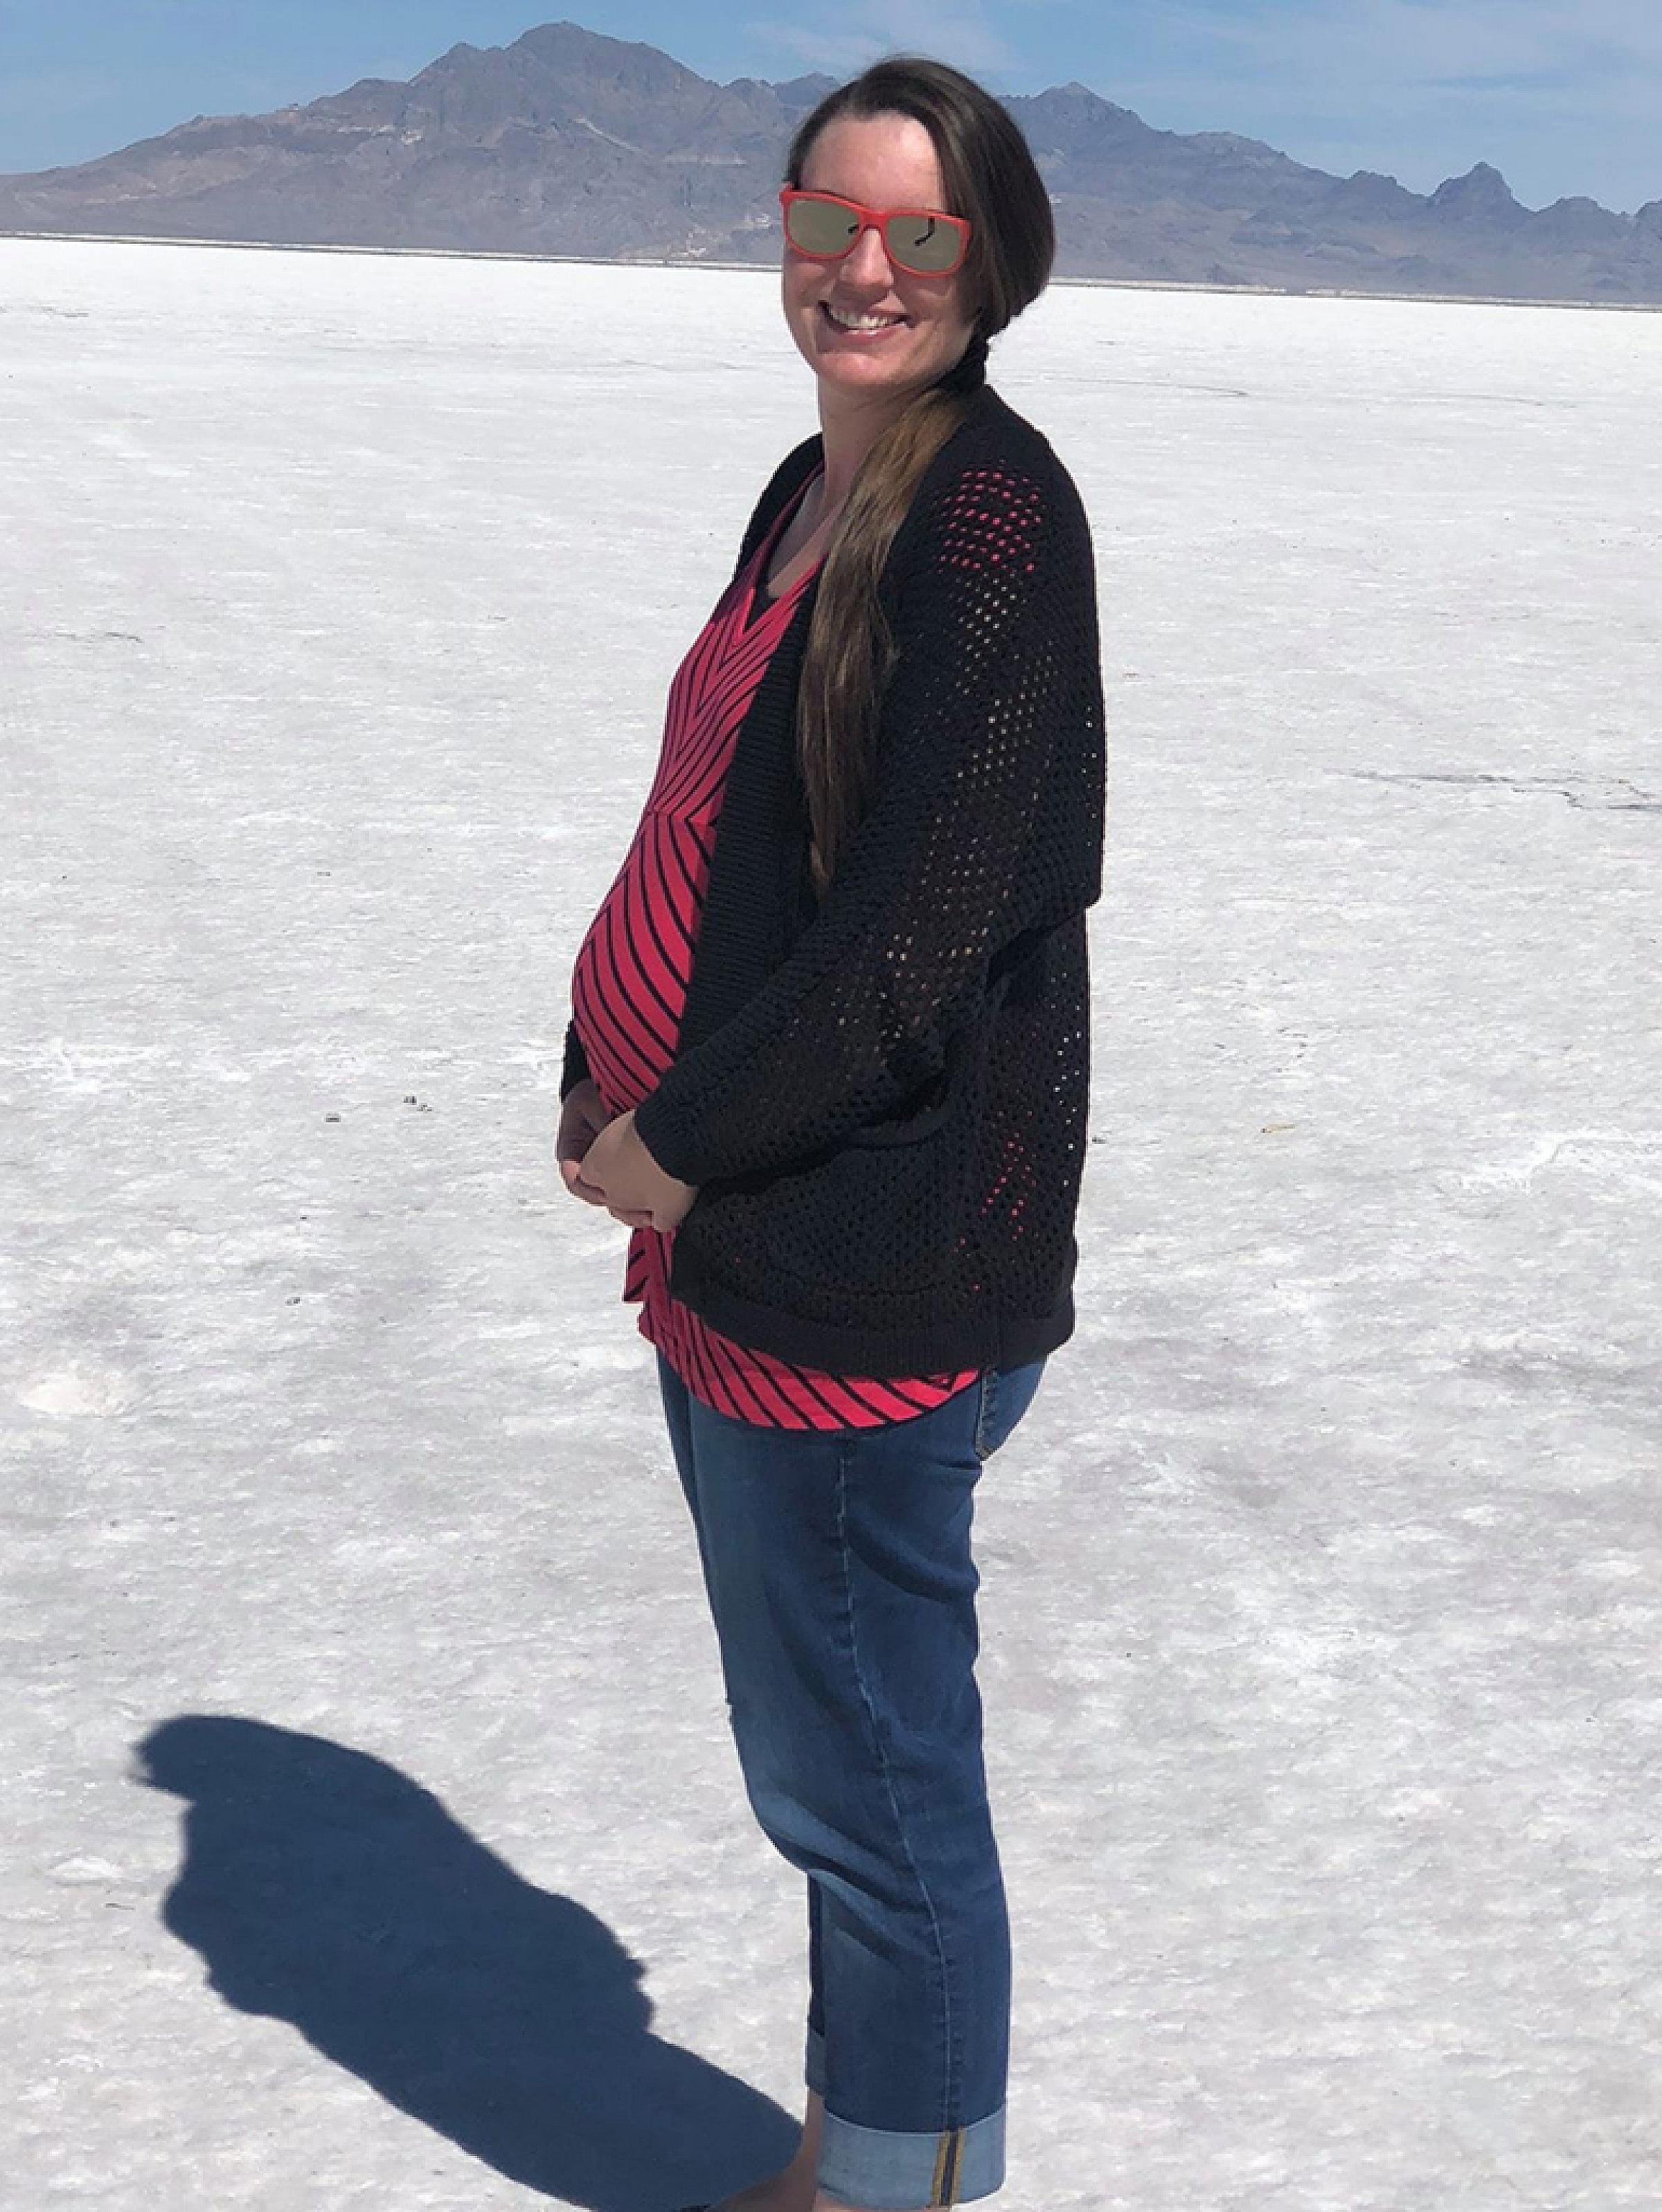 Sarah standing on the salt flats while pregnant